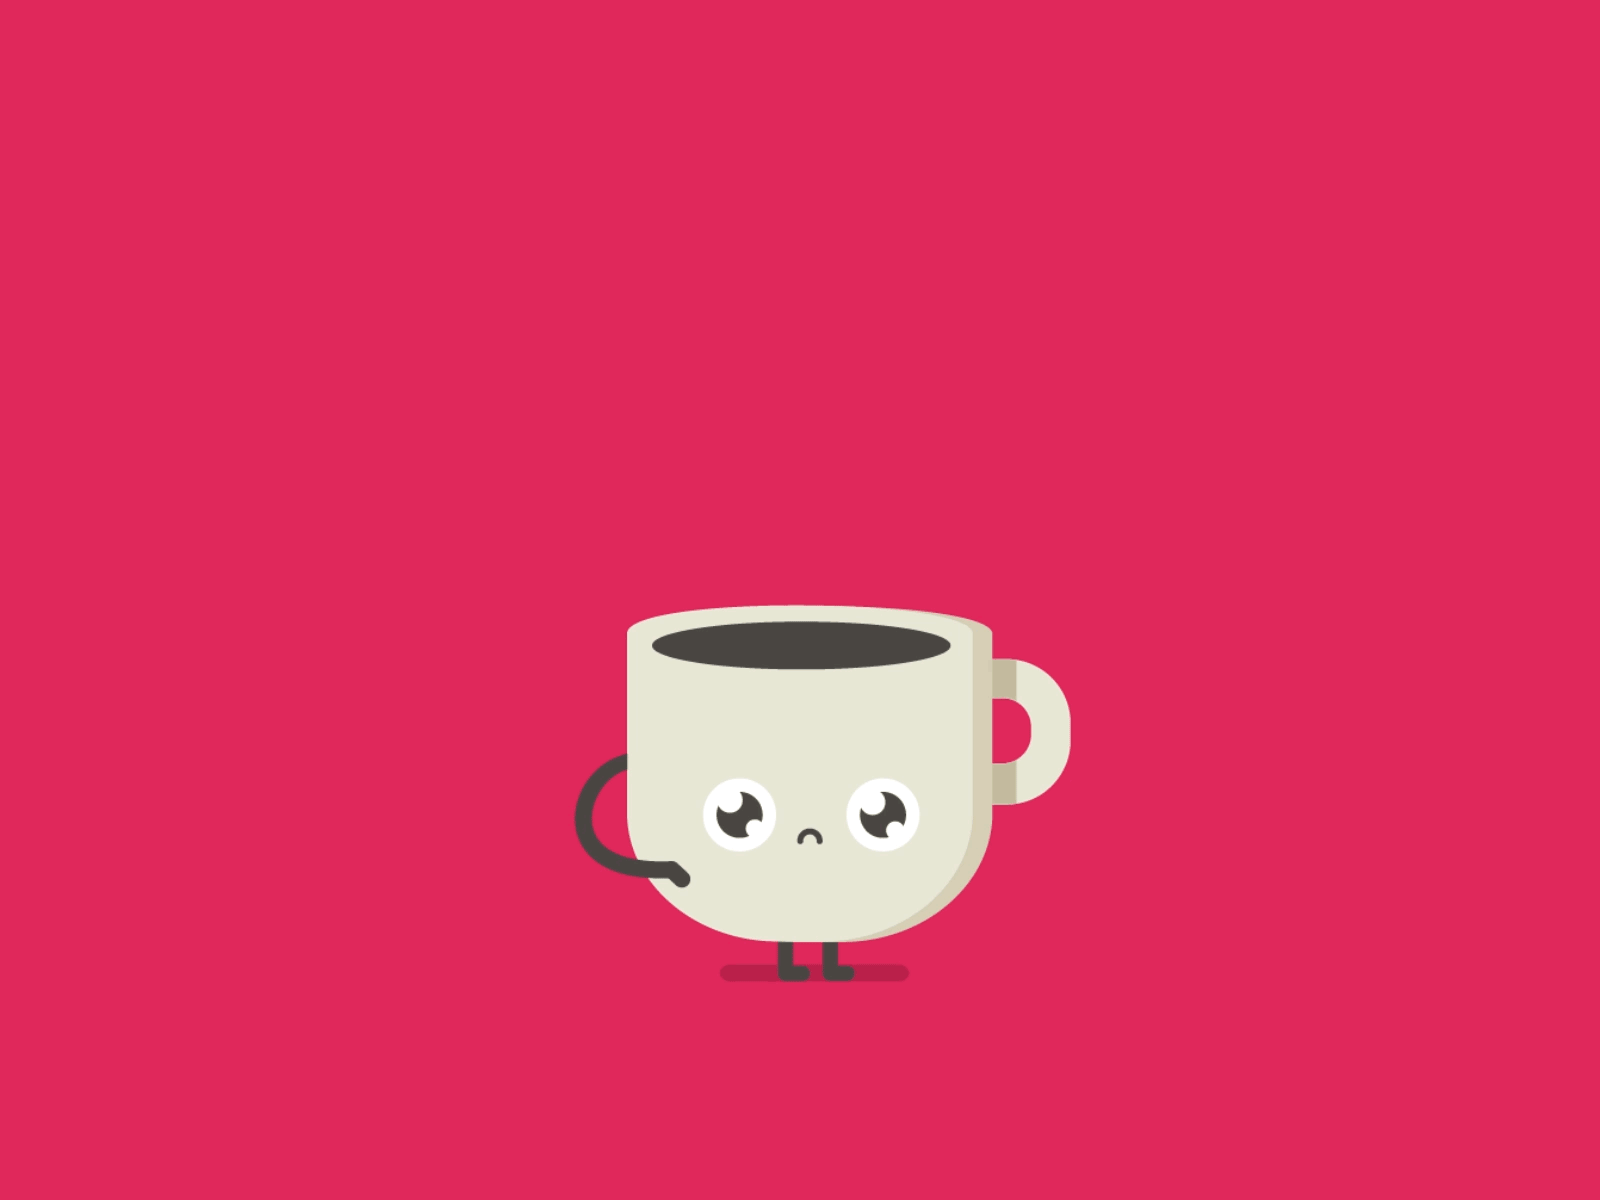 Coffee is over 💔 2d animation cute design illustration interface ui ux